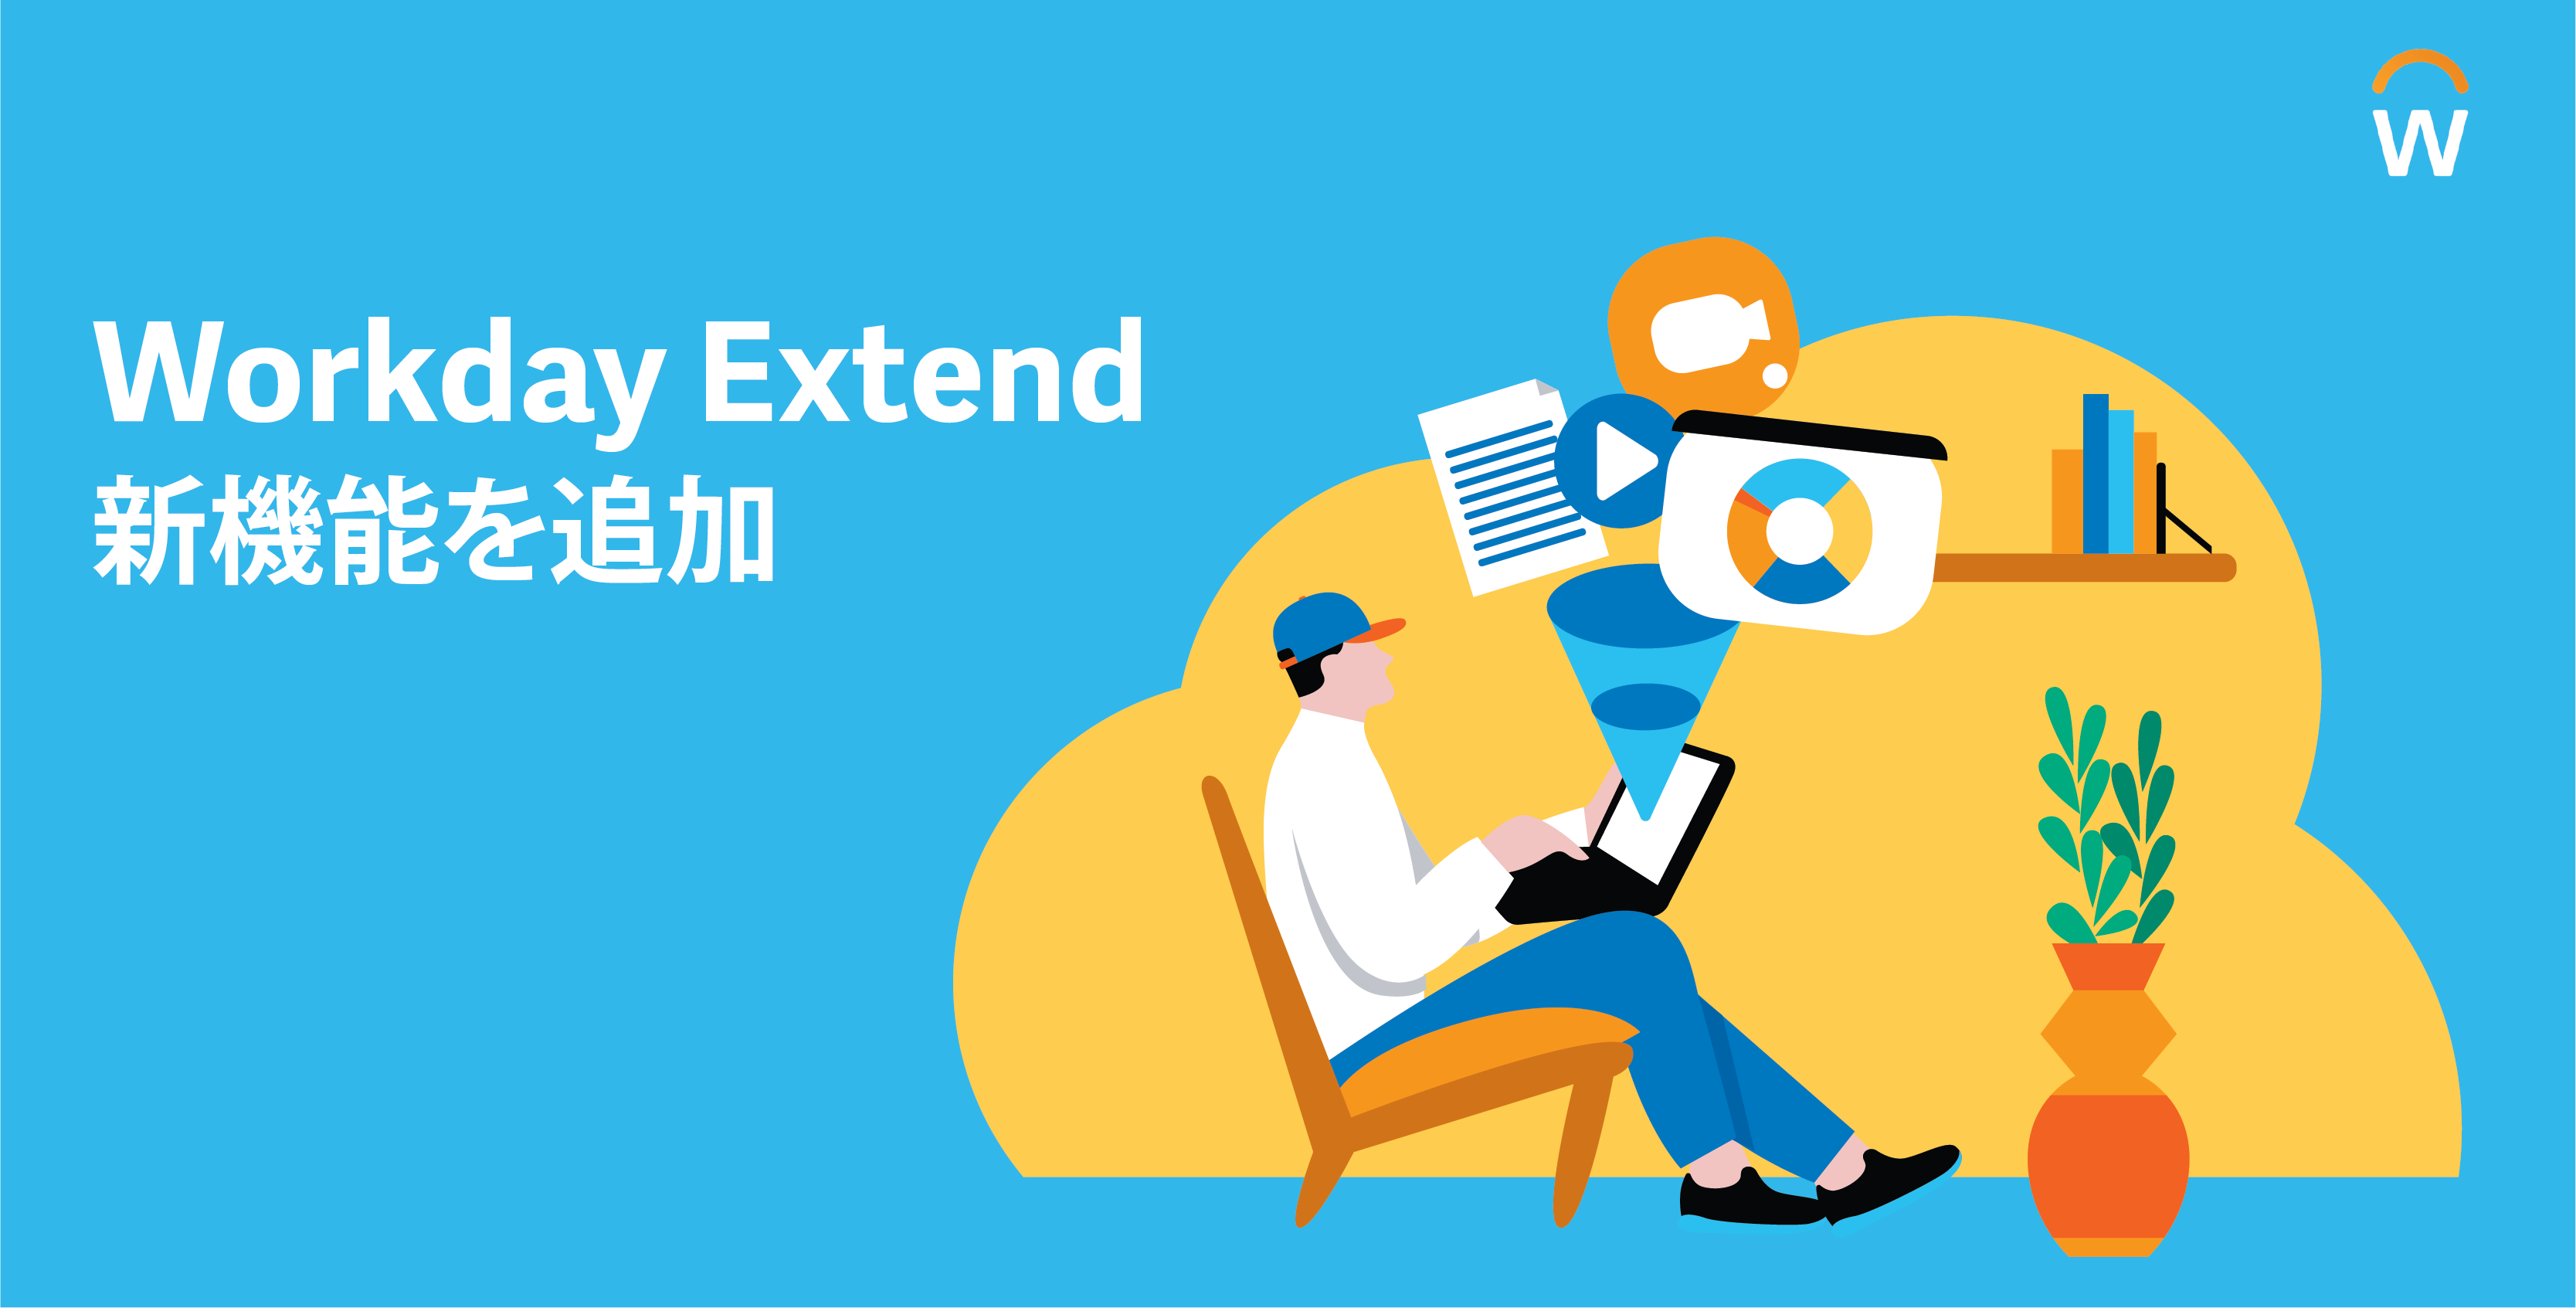 Workday Extend向け新機能Workday Orchestrateとデータロジックを発表 ニュースリリース Workday